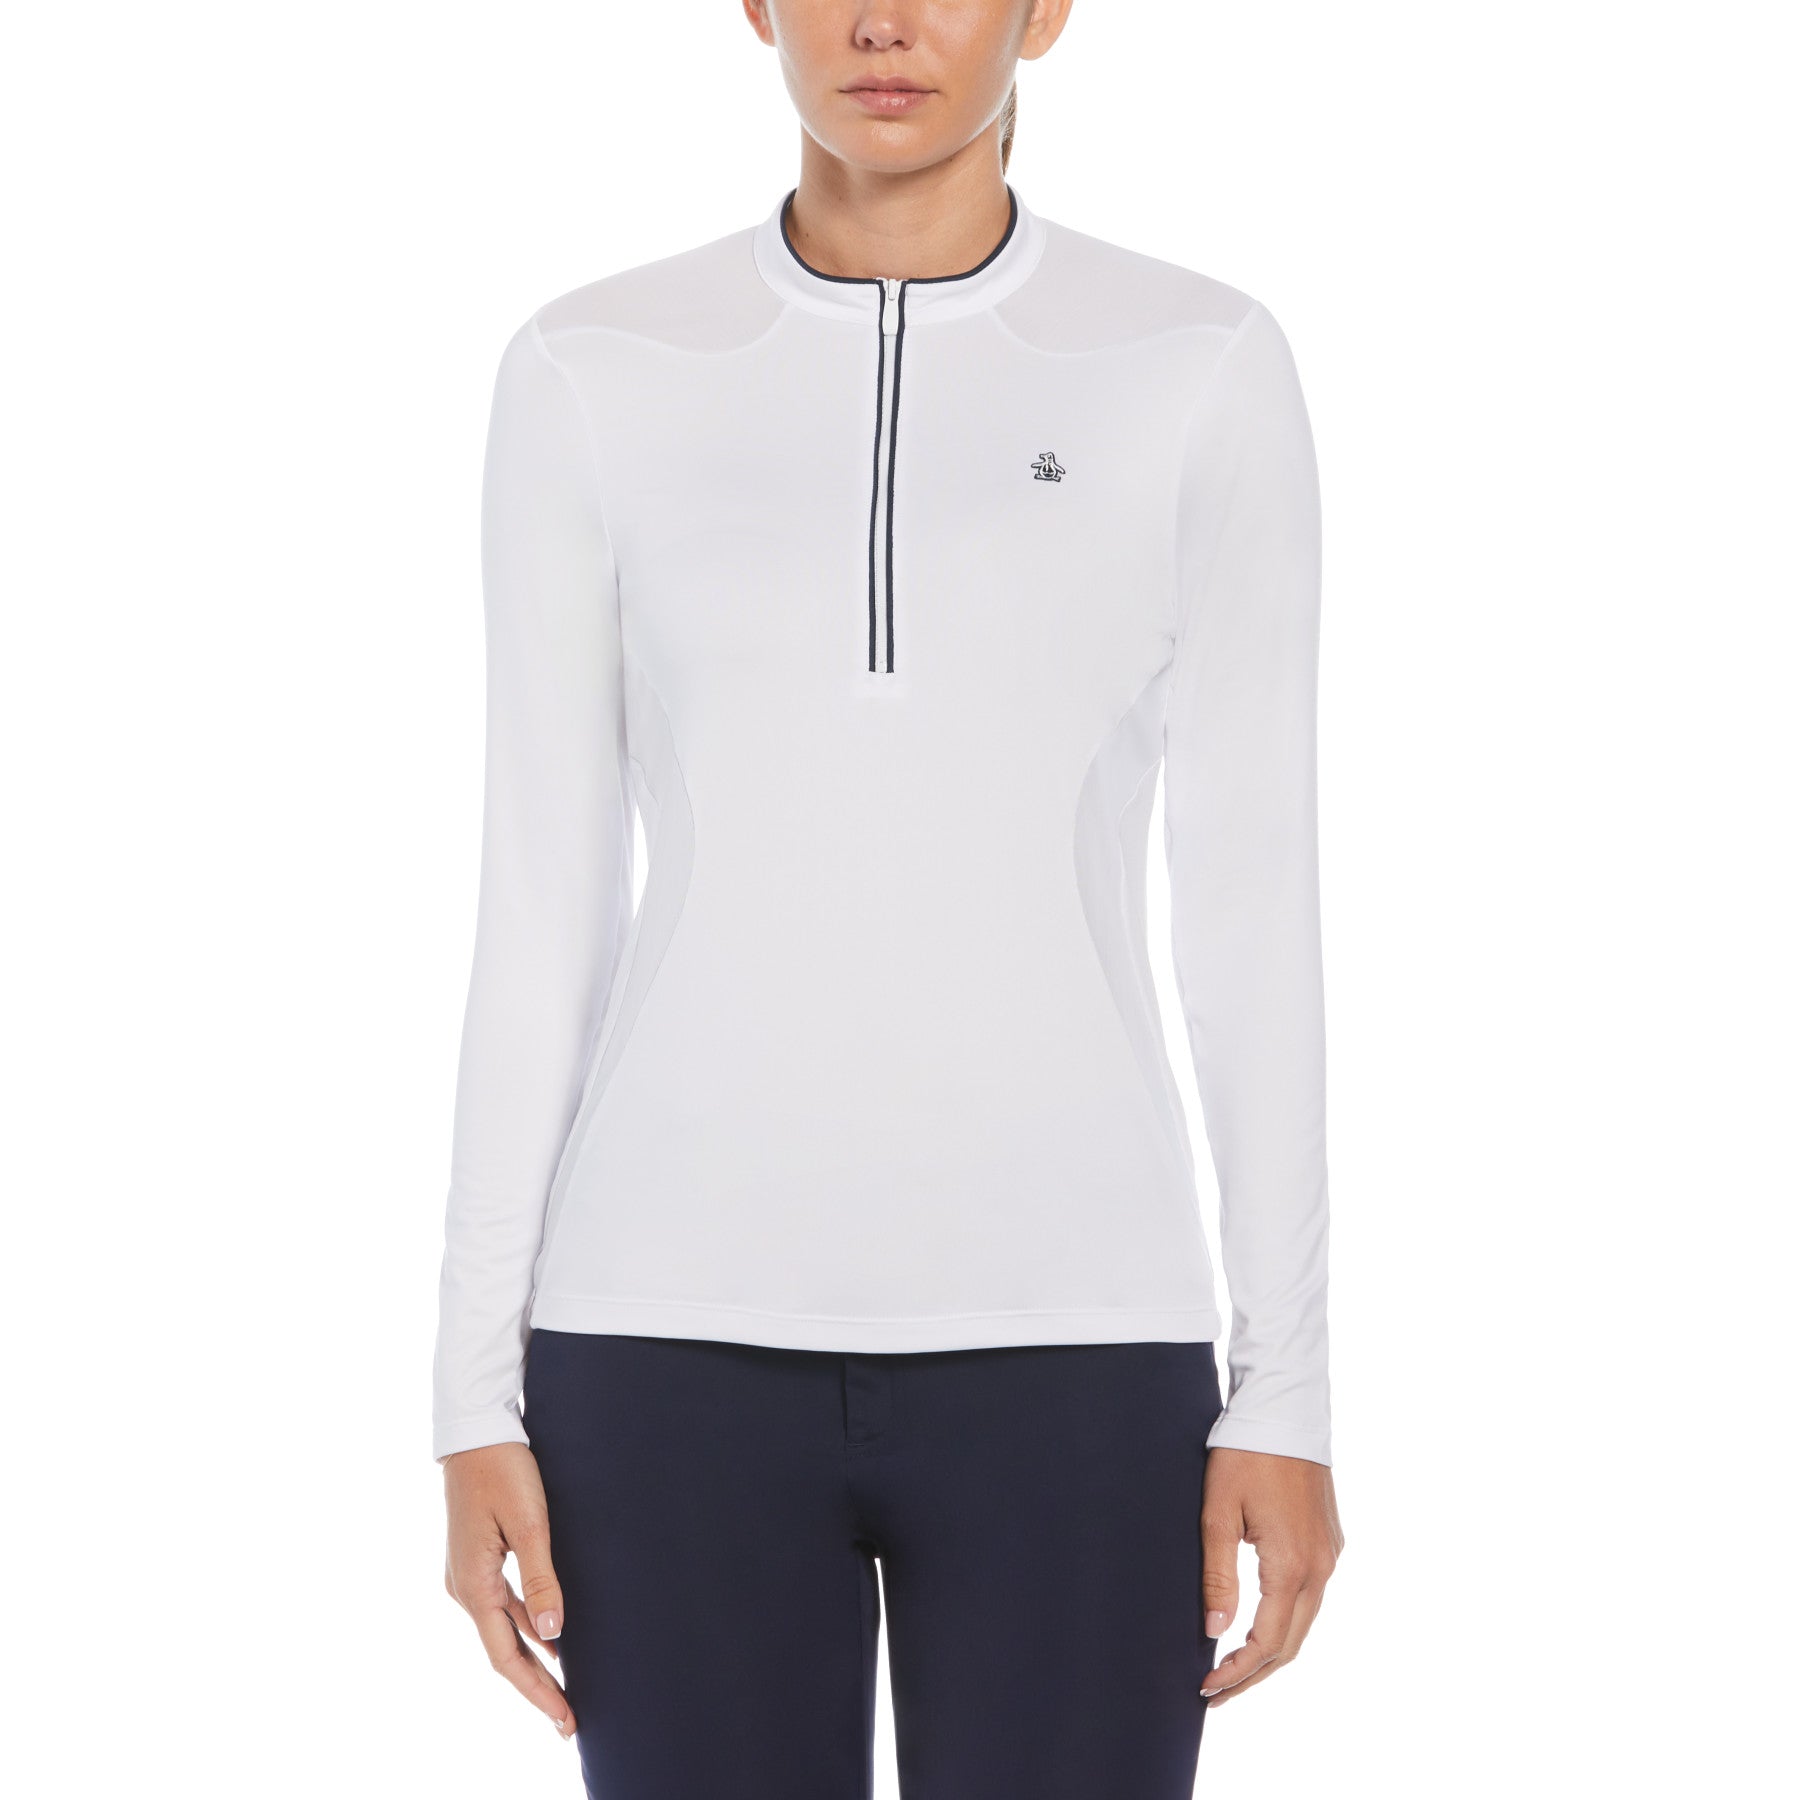 View Womens 14 Zip Layering Long Sleeve Golf Shirt In Bright White information